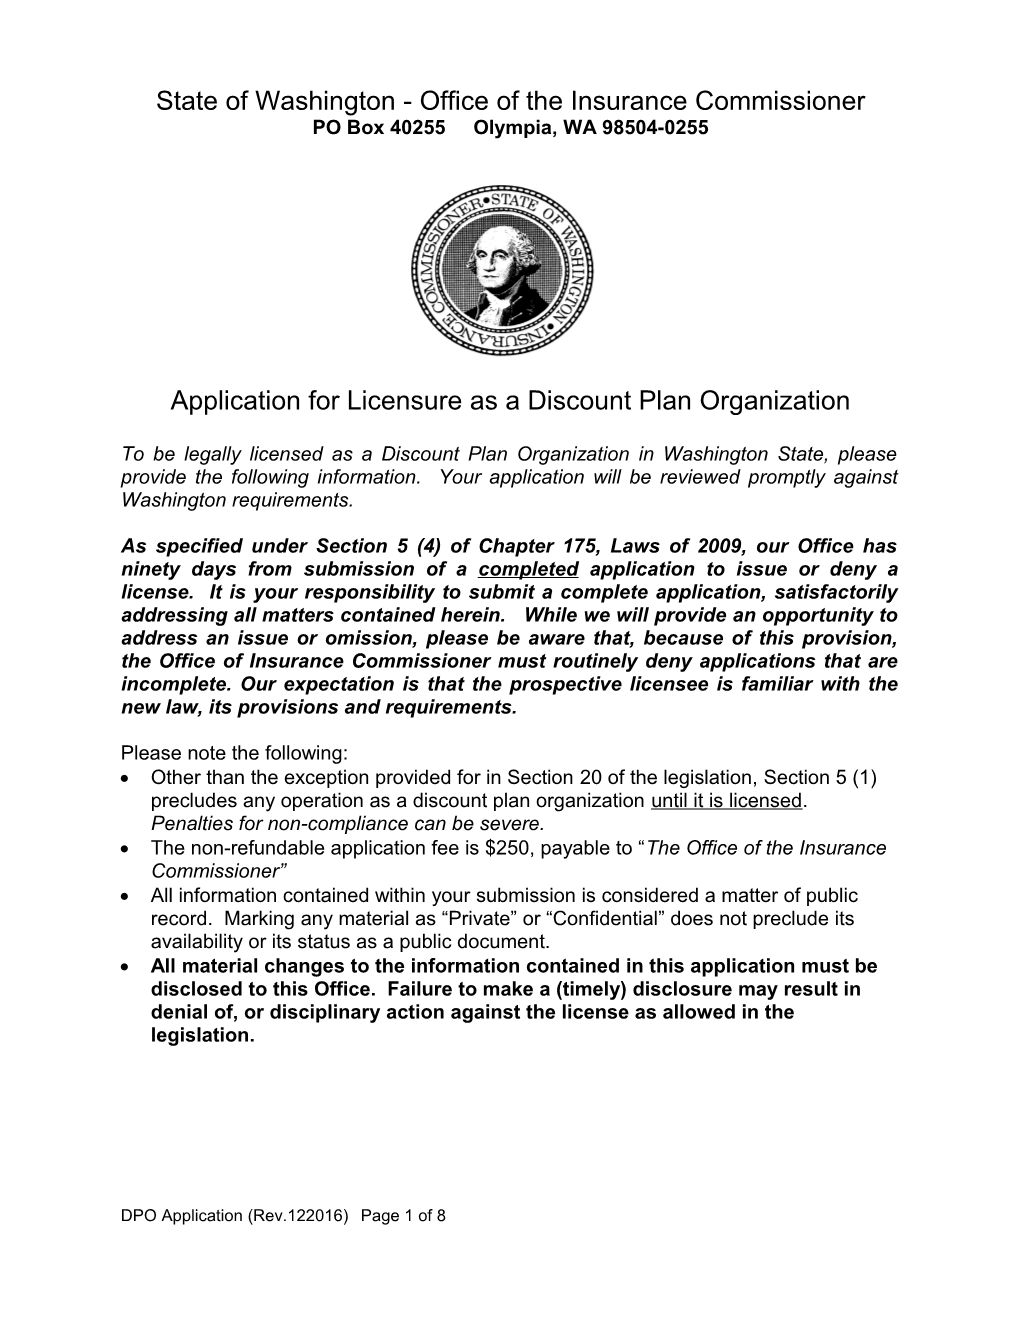 Application for Licensure As a Discount Plan Organization